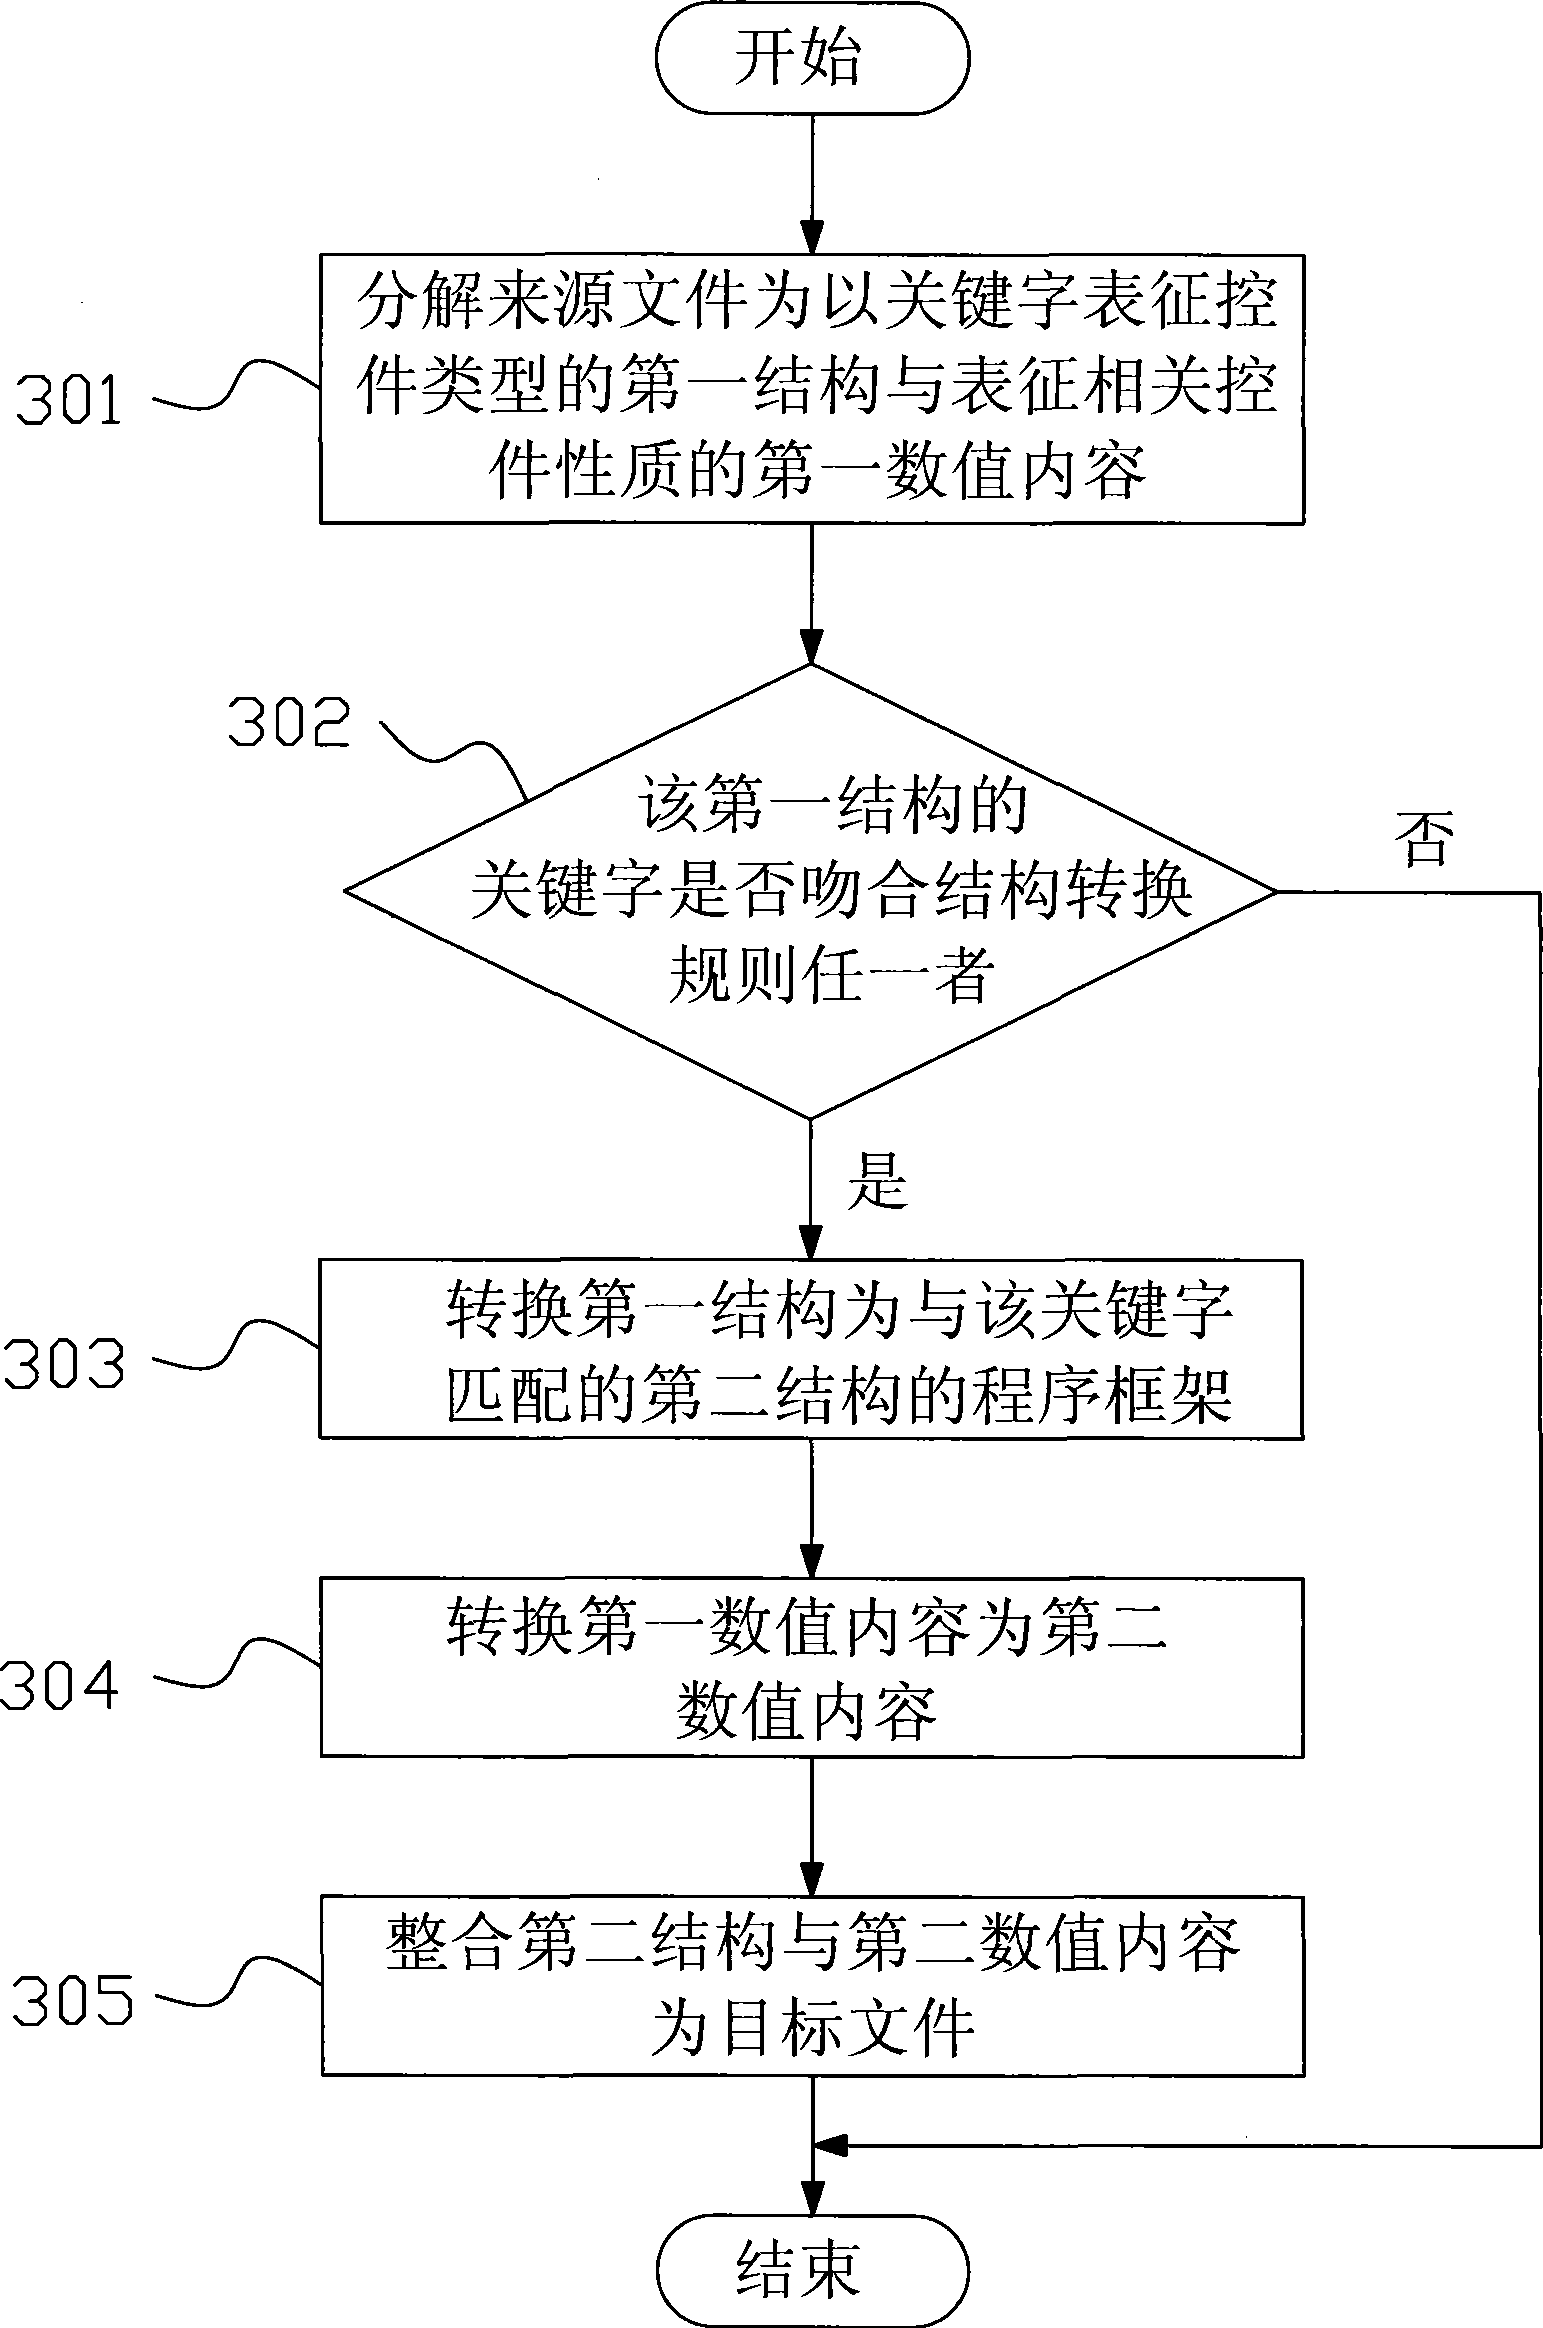 Electronic file conversion system and method